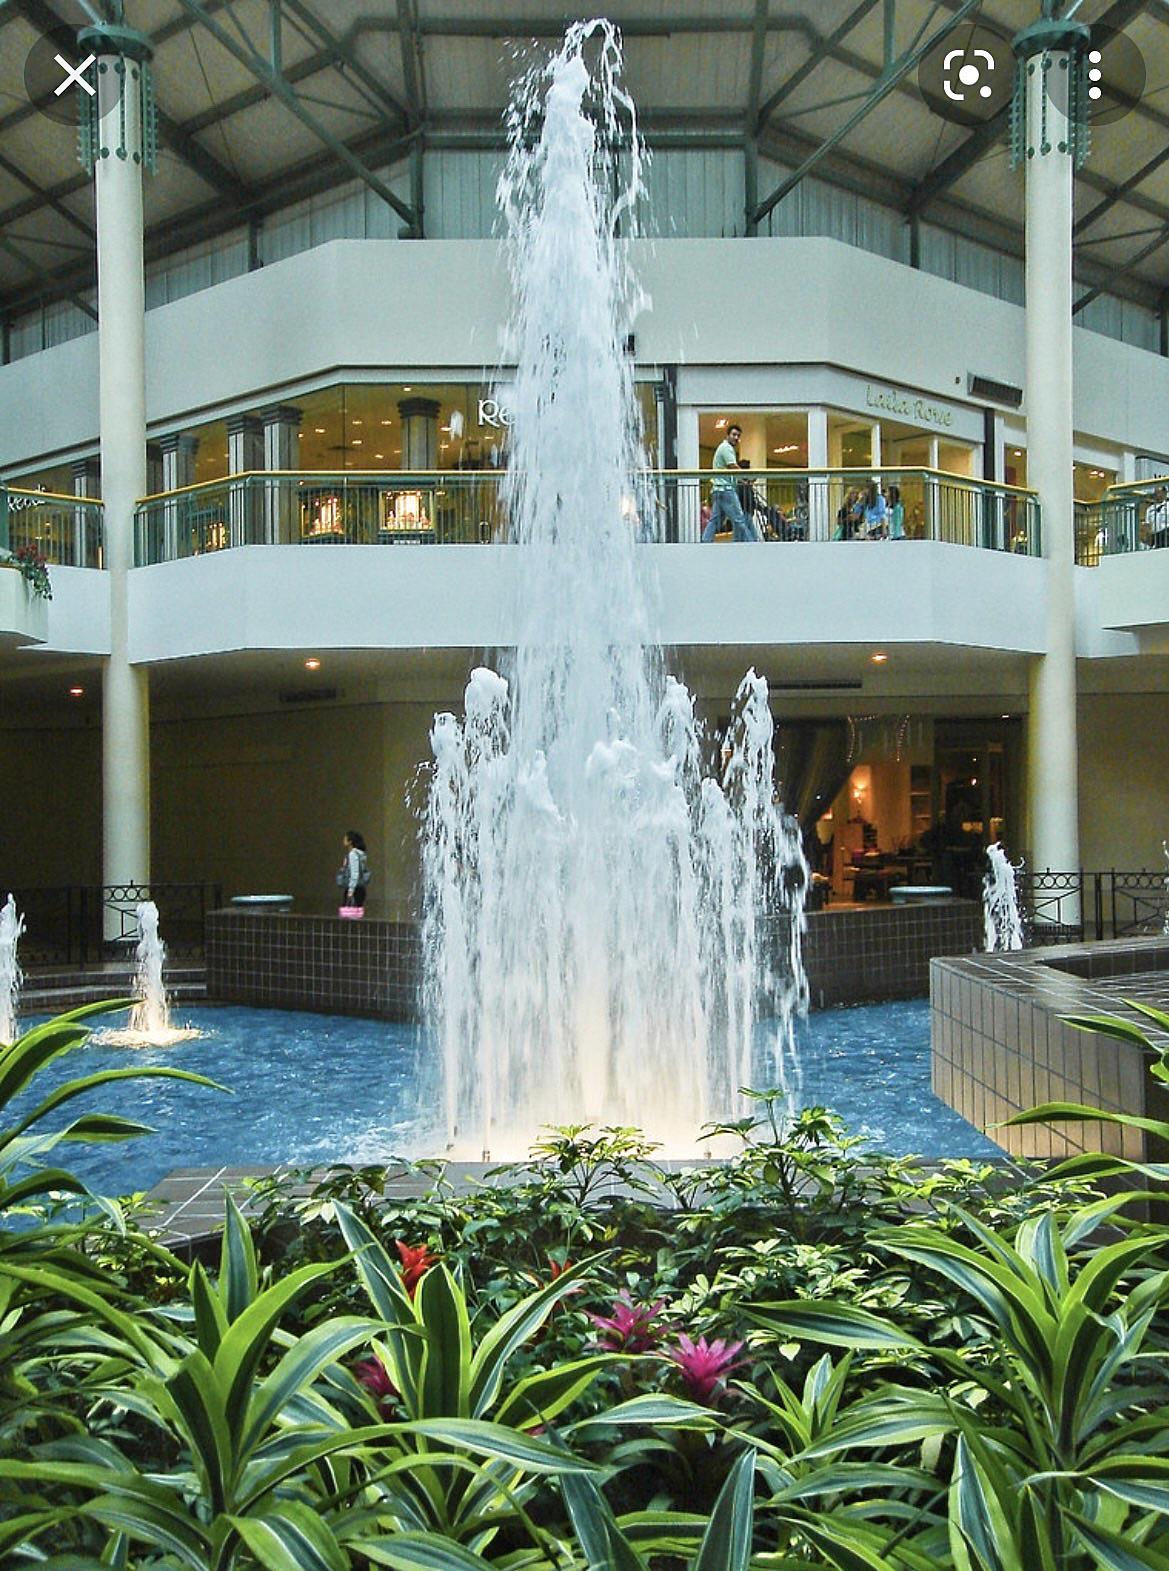 Old fountains and aquariums at Woodfield Mall.